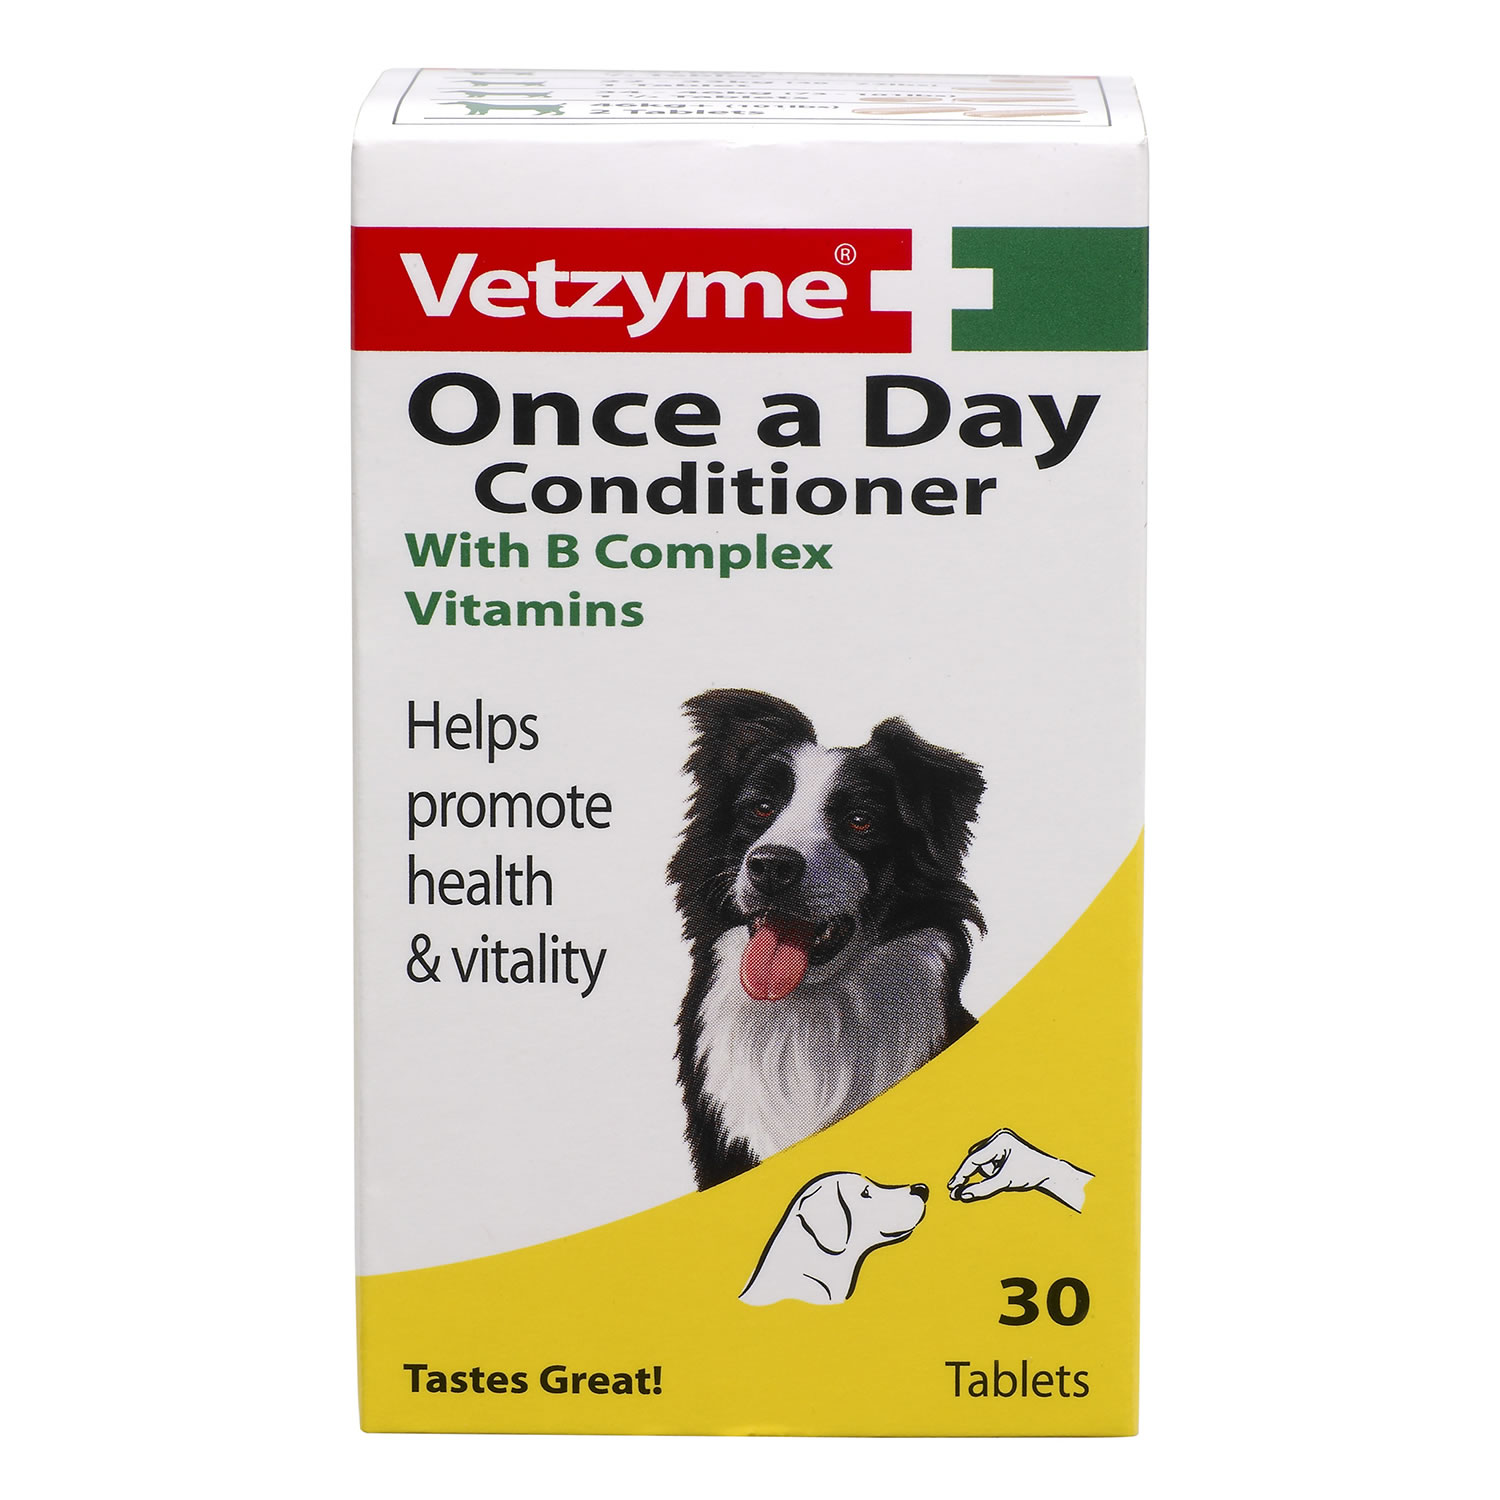 VETZYME ONCE A DAY CONDITIONING TABLETS VETZYME ONCE A DAY CONDITIONING TABLETS 30 PACK  30 PACK